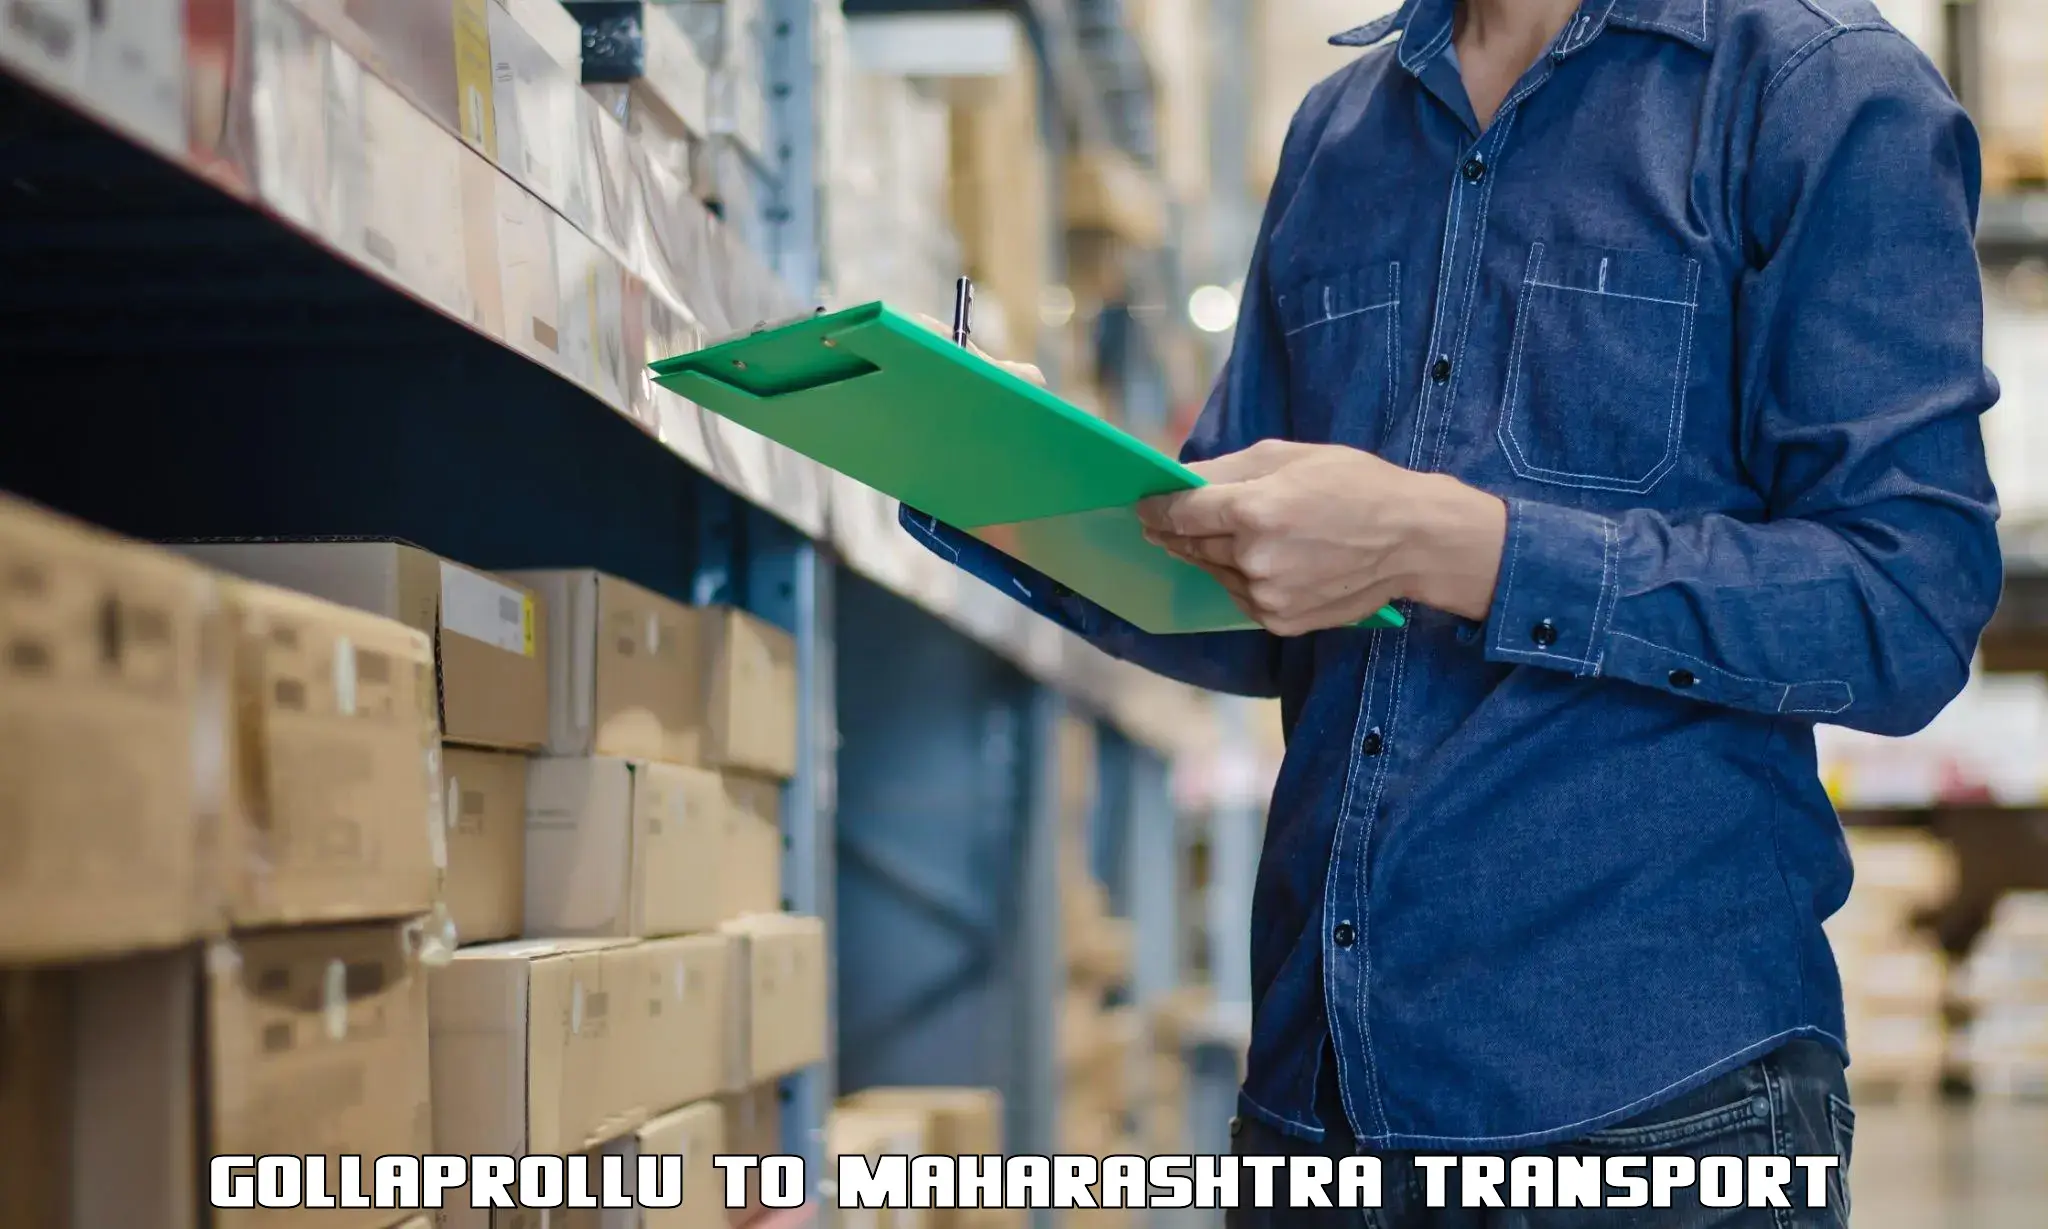 Part load transport service in India Gollaprollu to Bhiwandi